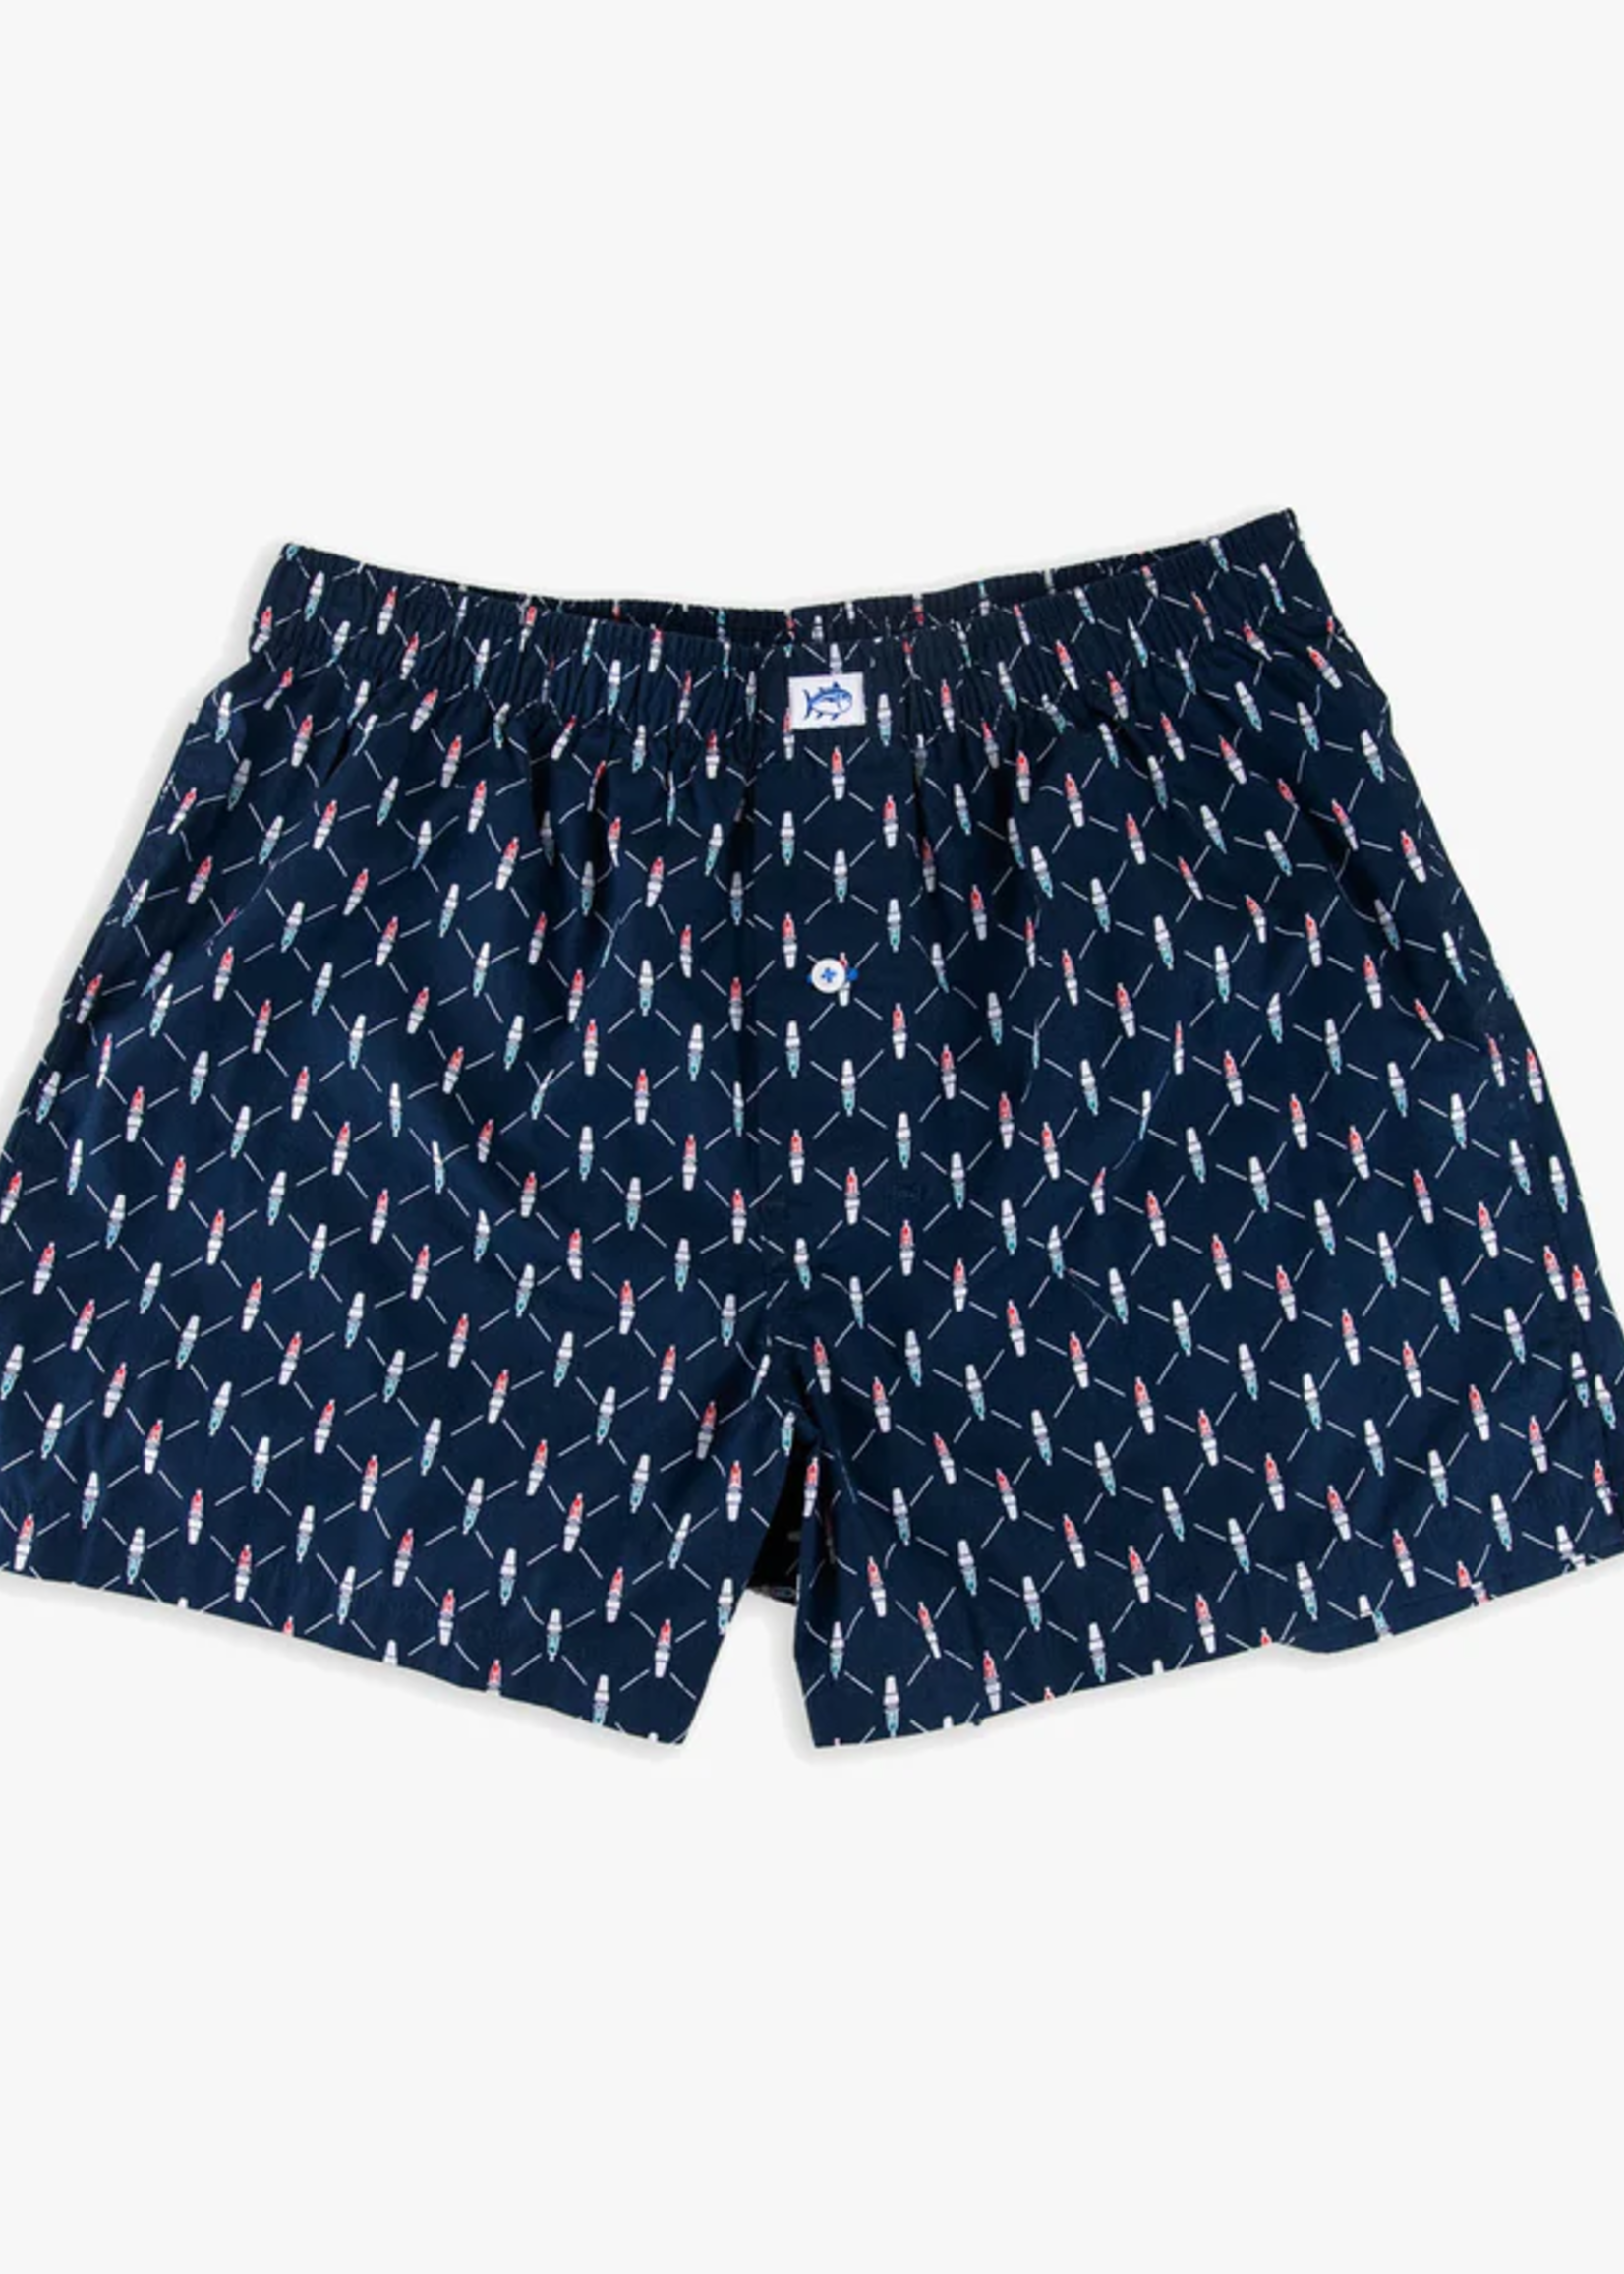 Southern Tide Watts Up Boxer